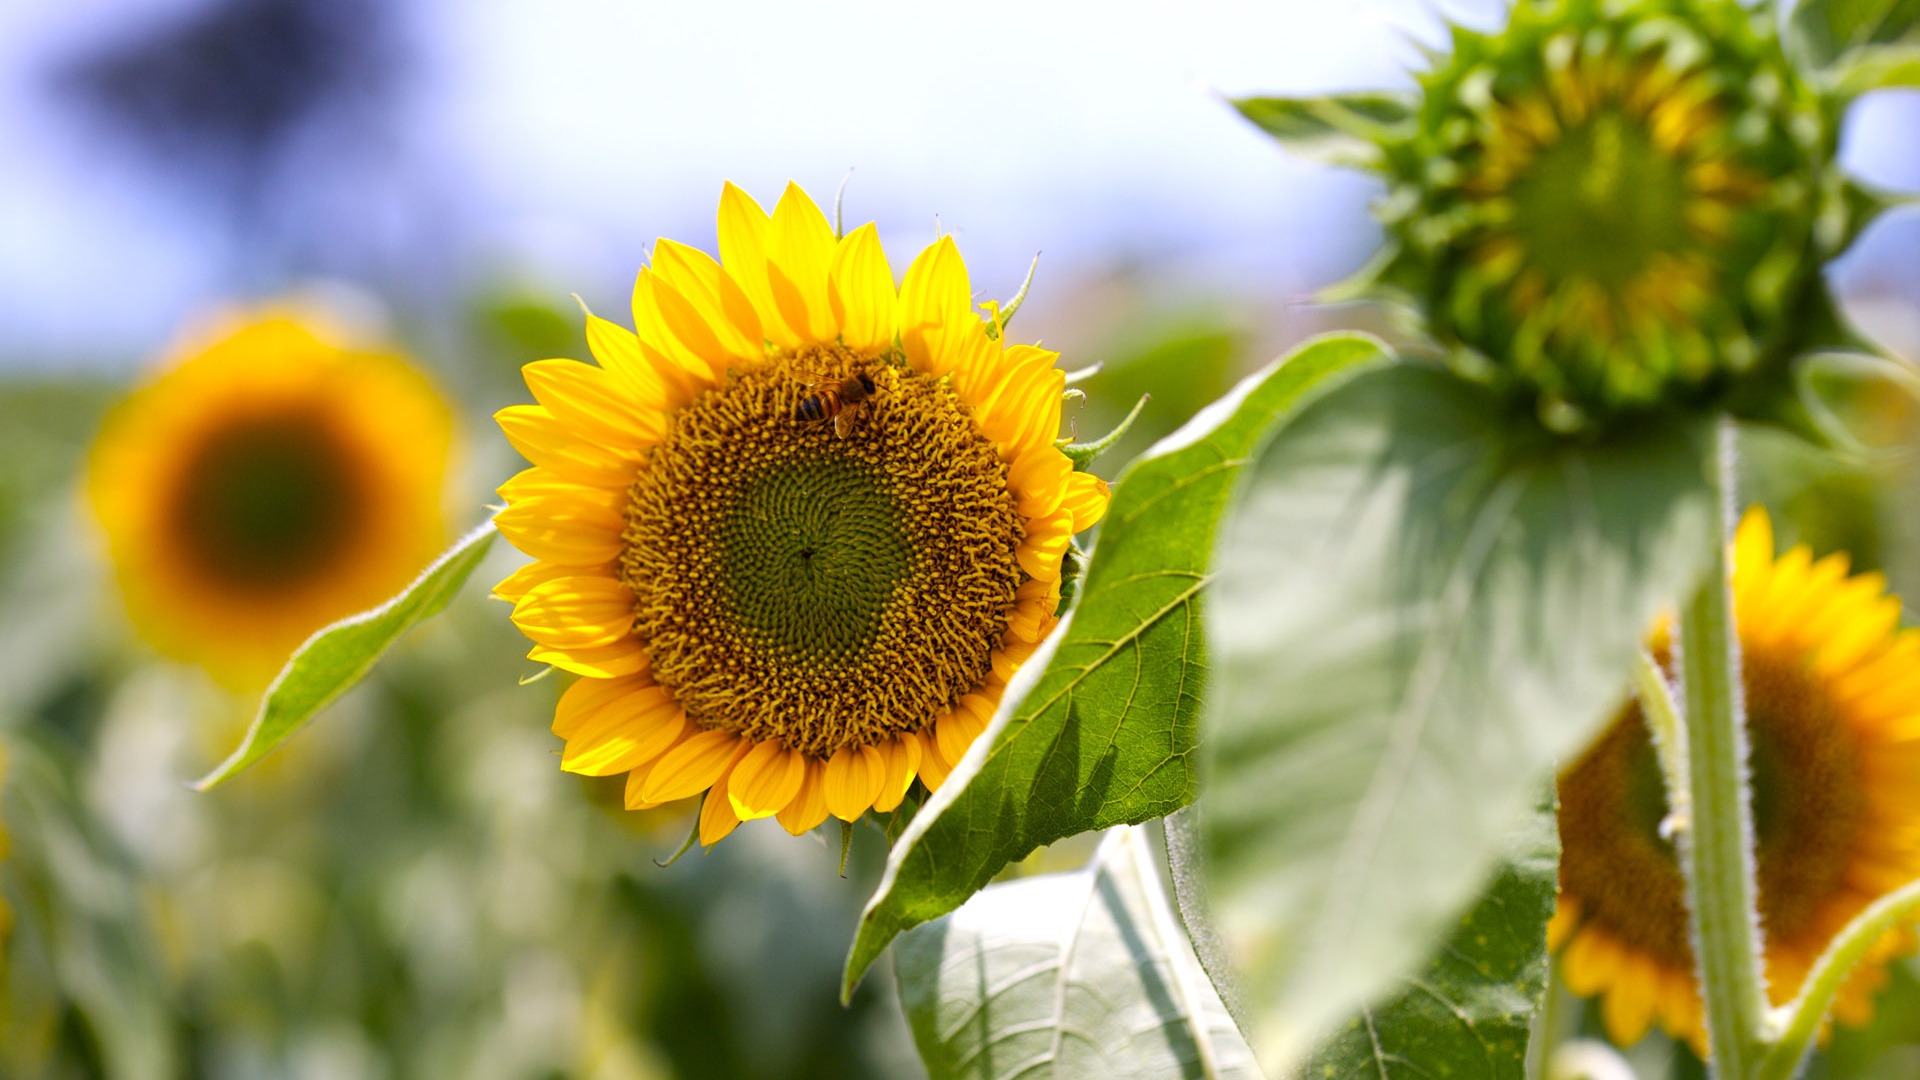 Sunny sunflower photo HD Wallpapers #21 - 1920x1080